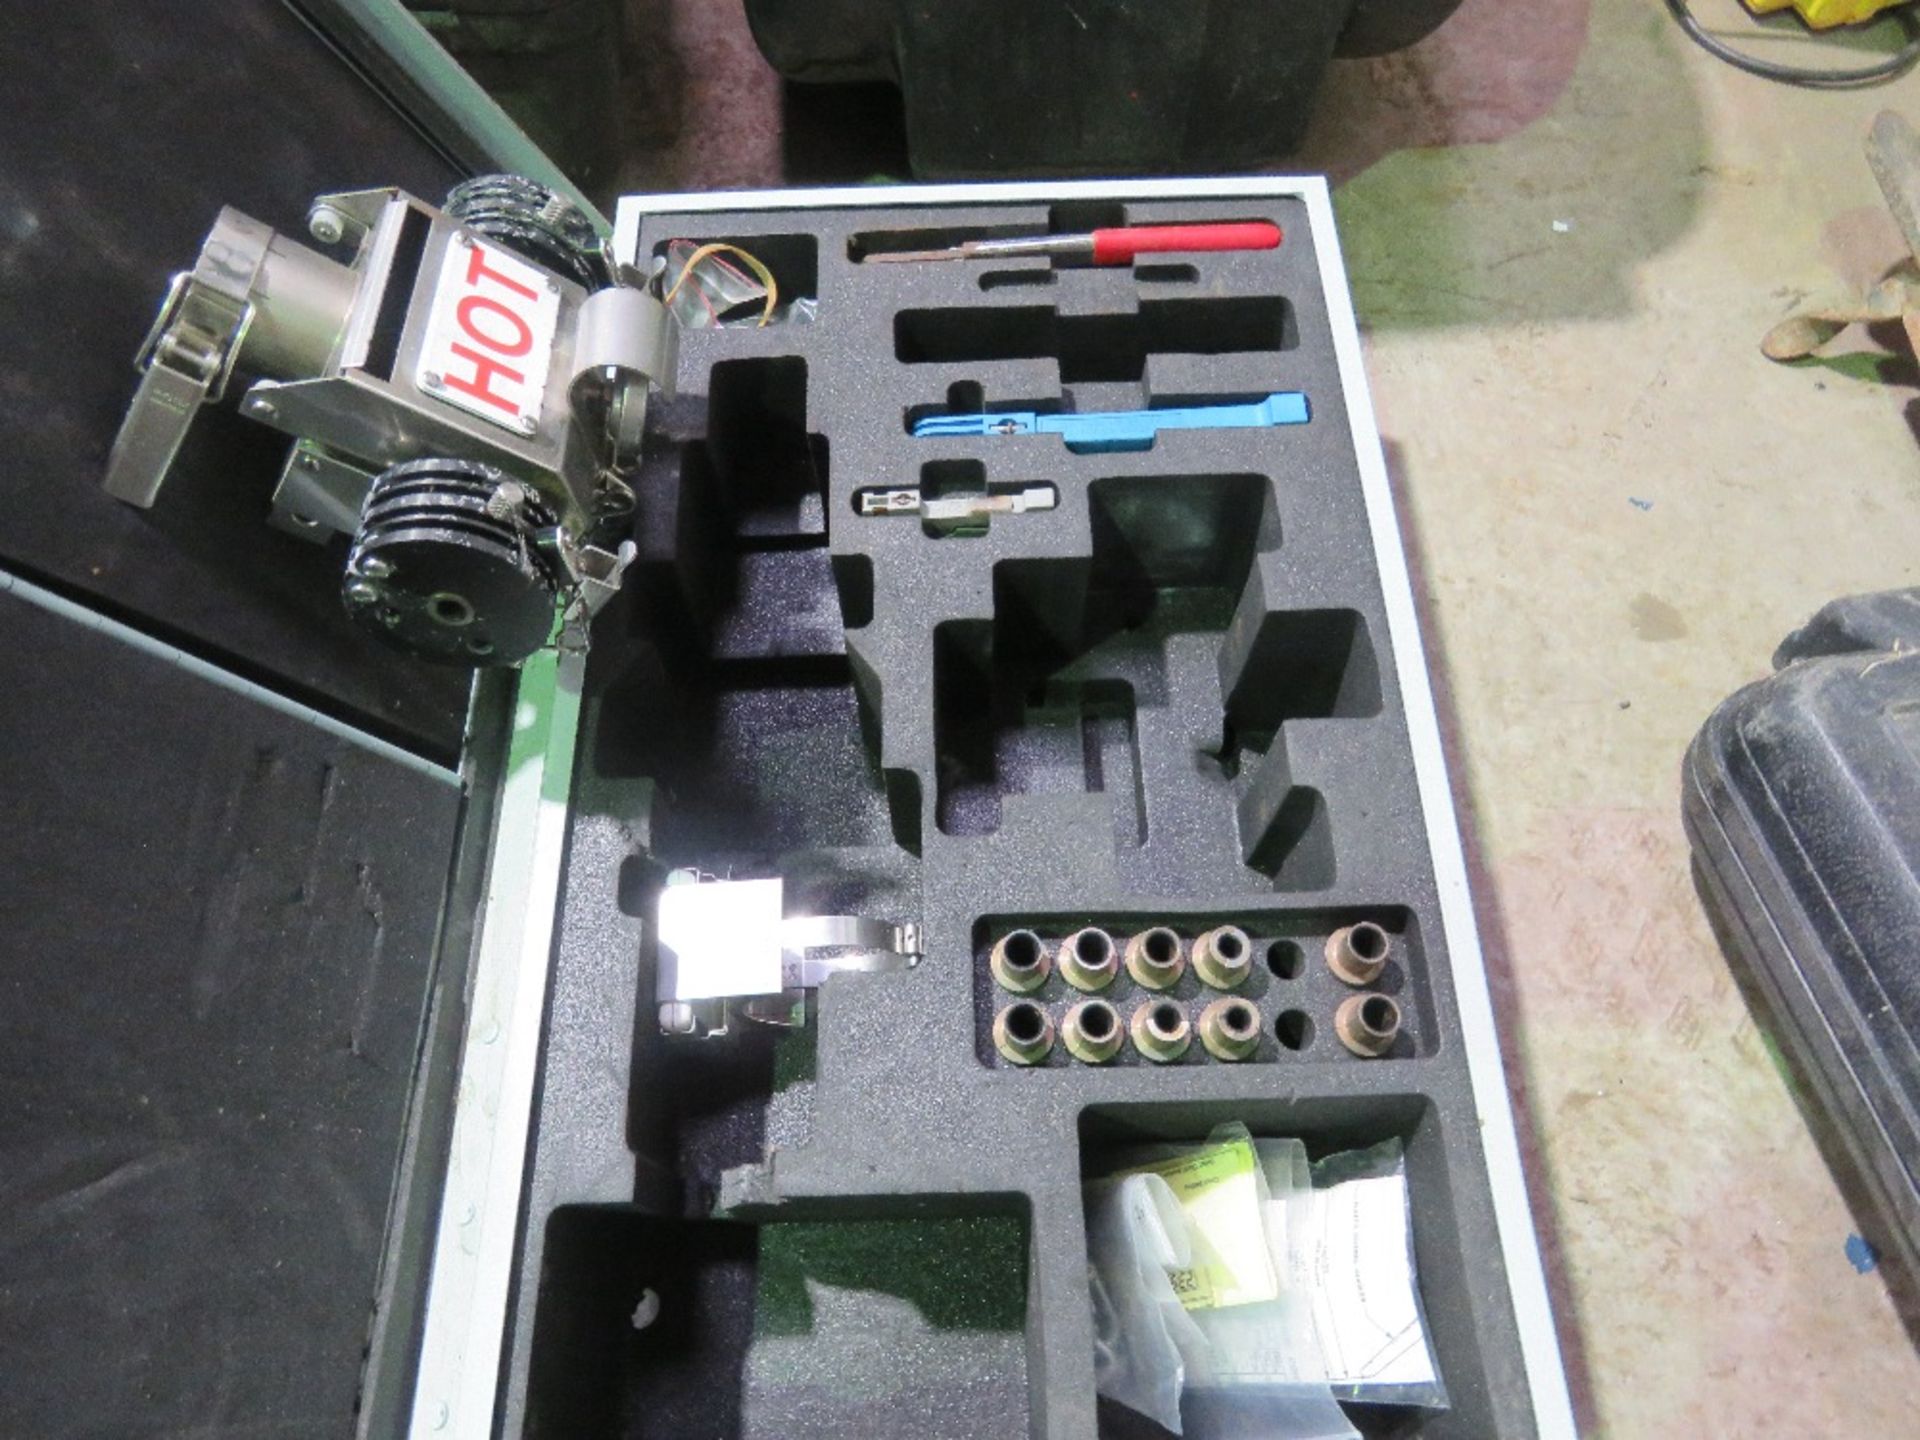 RAYCHEM INSTALLATION KIT IN A CASE. - Image 3 of 4